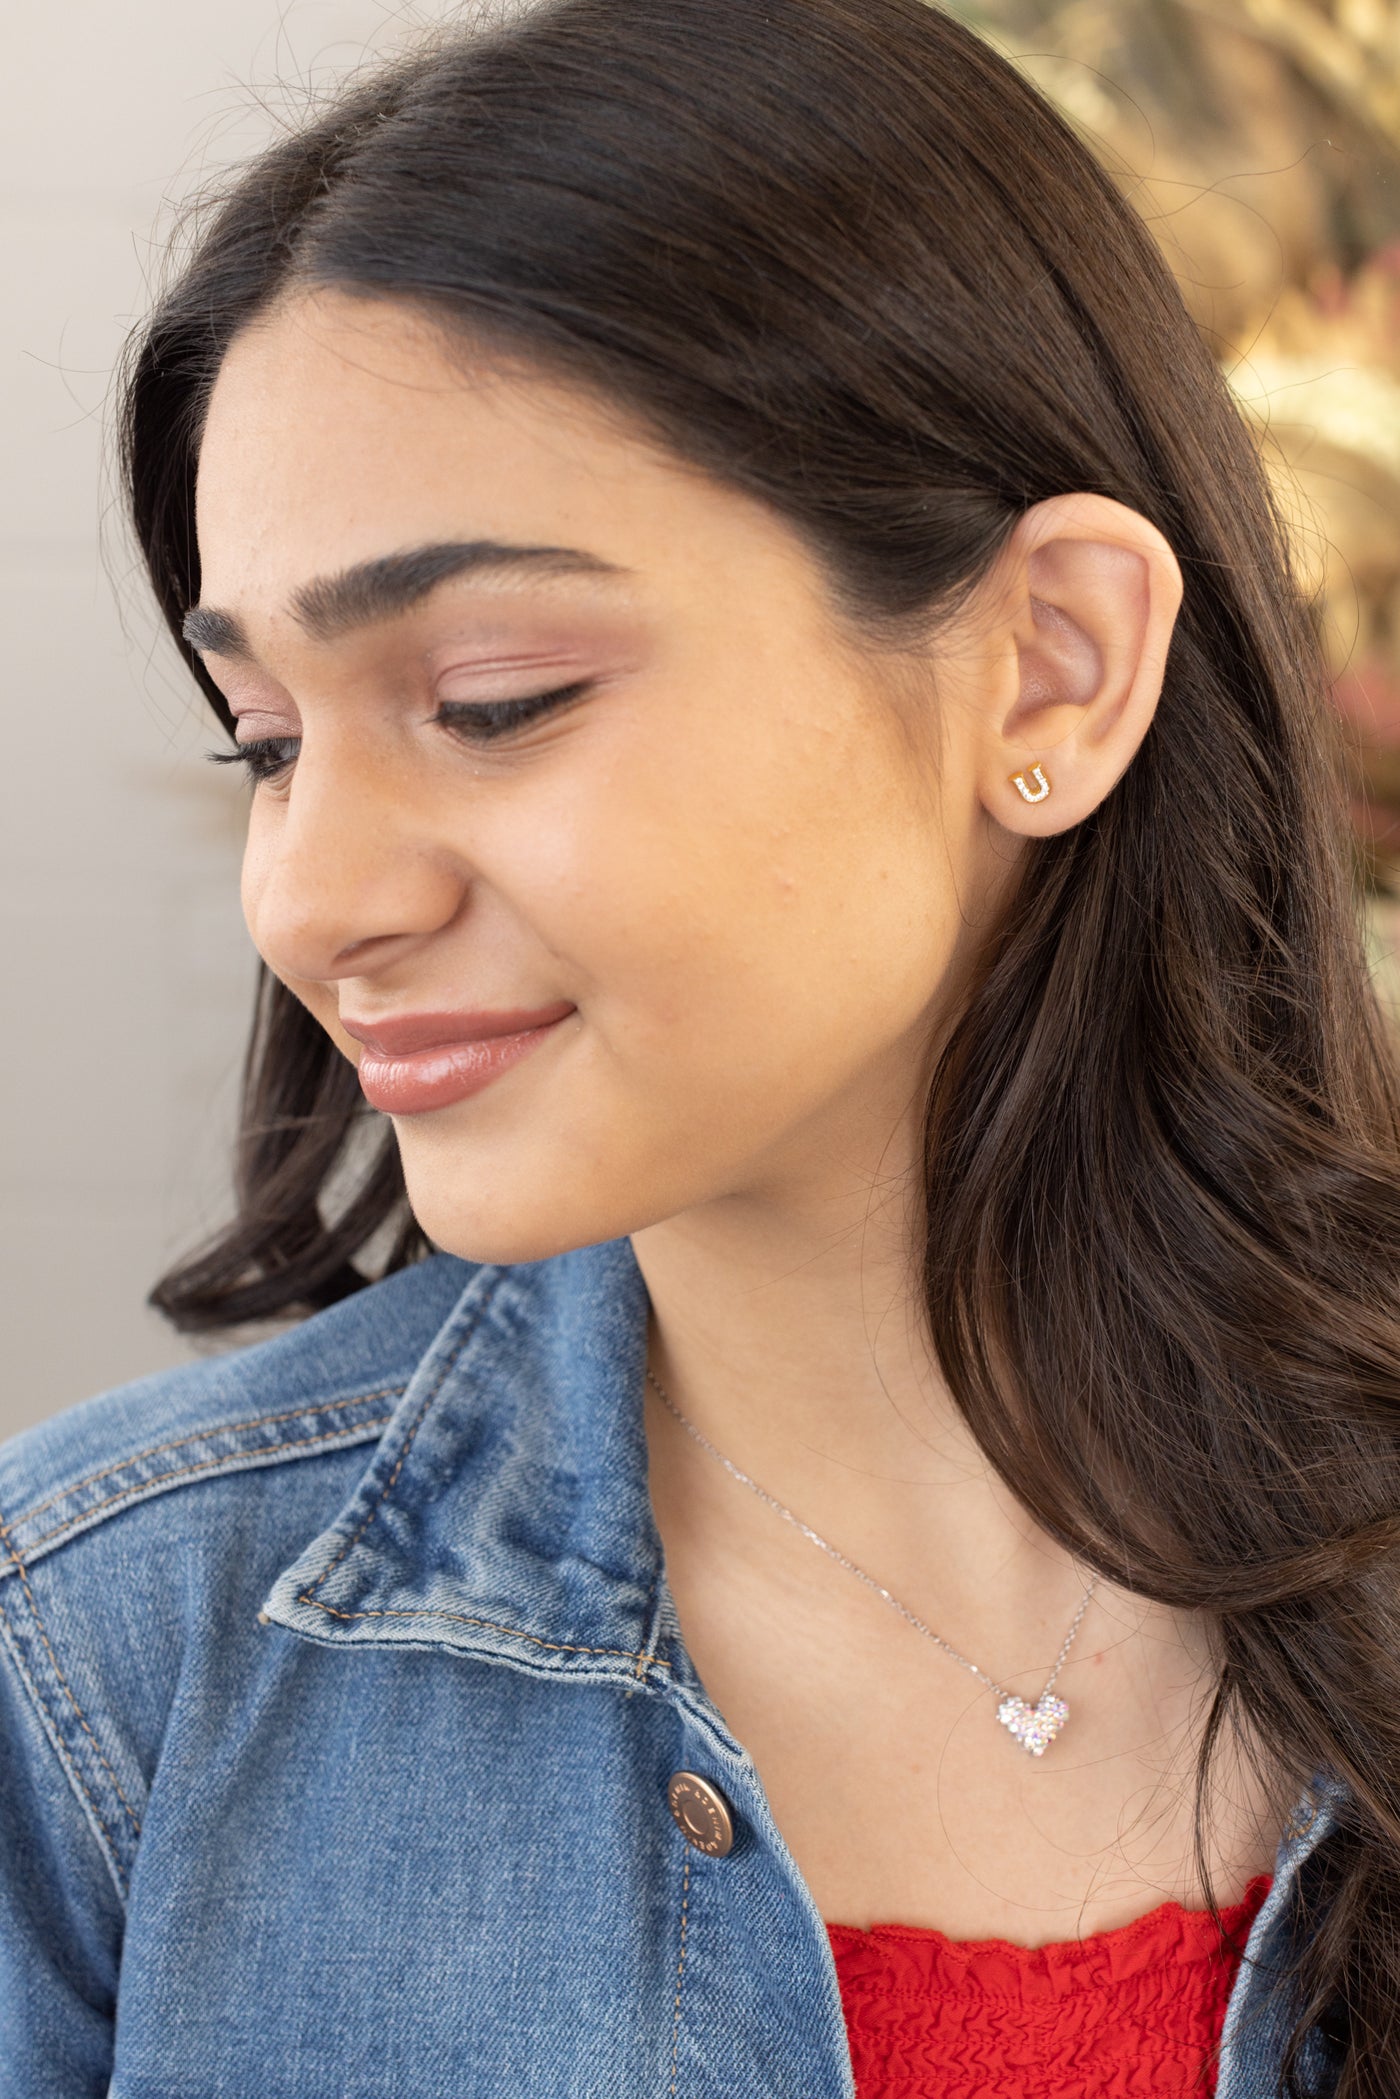 “I love You” Crystal Sterling Silver Stud Earrings | Annie and Sisters